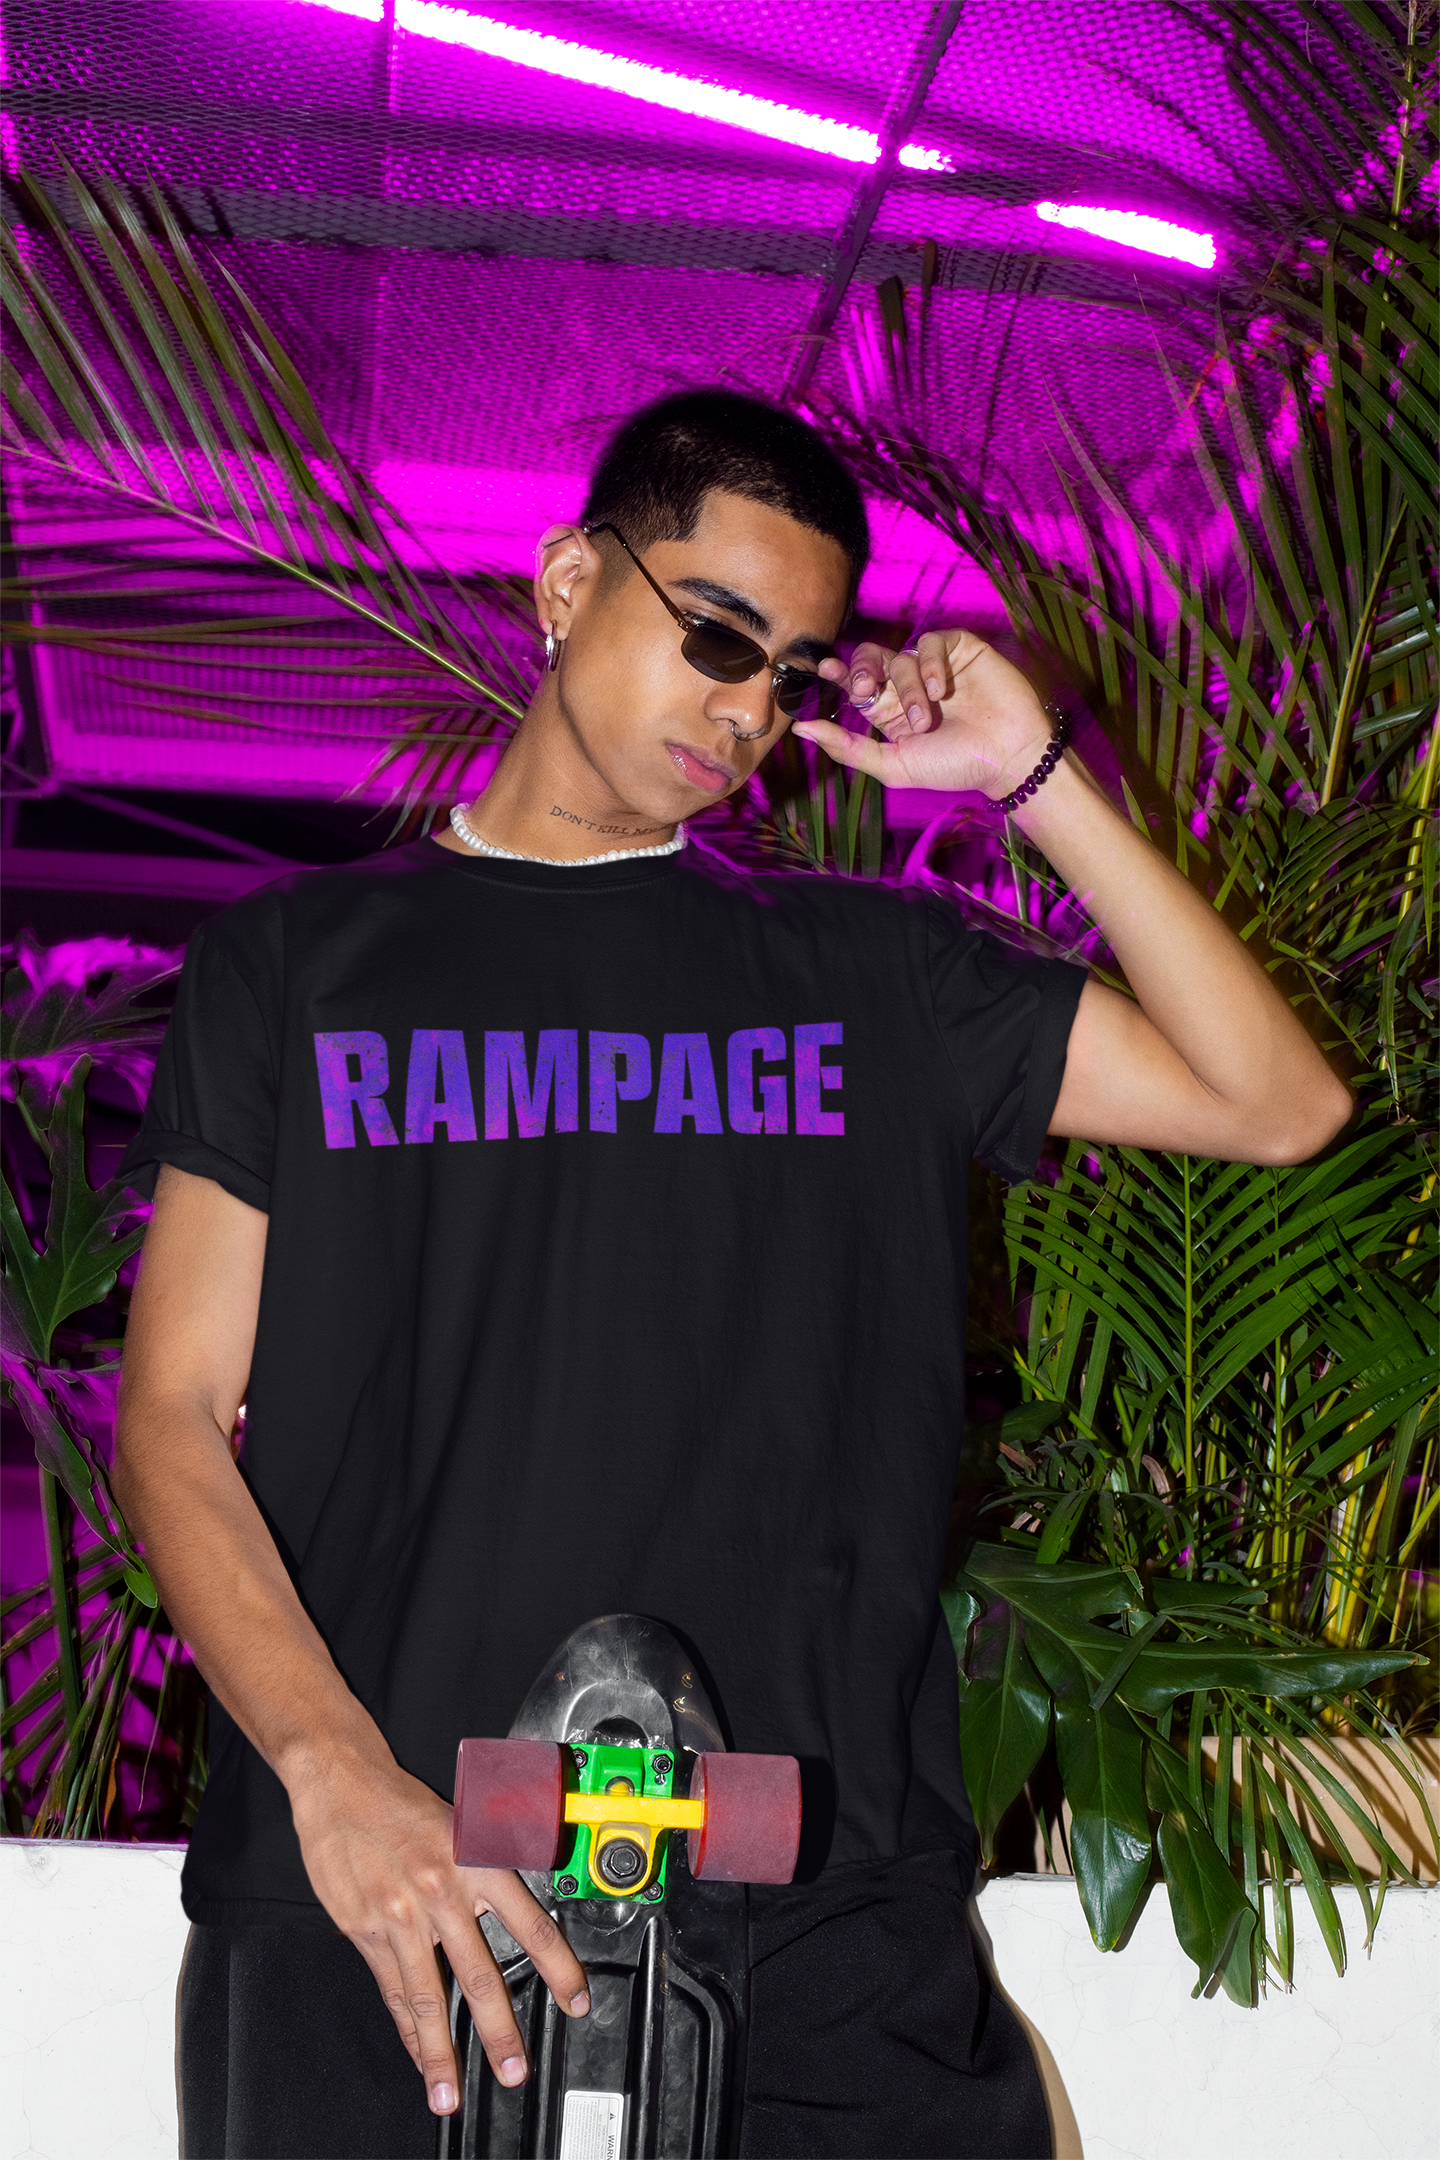 Rampage Unisex White Over-sized T-shirt